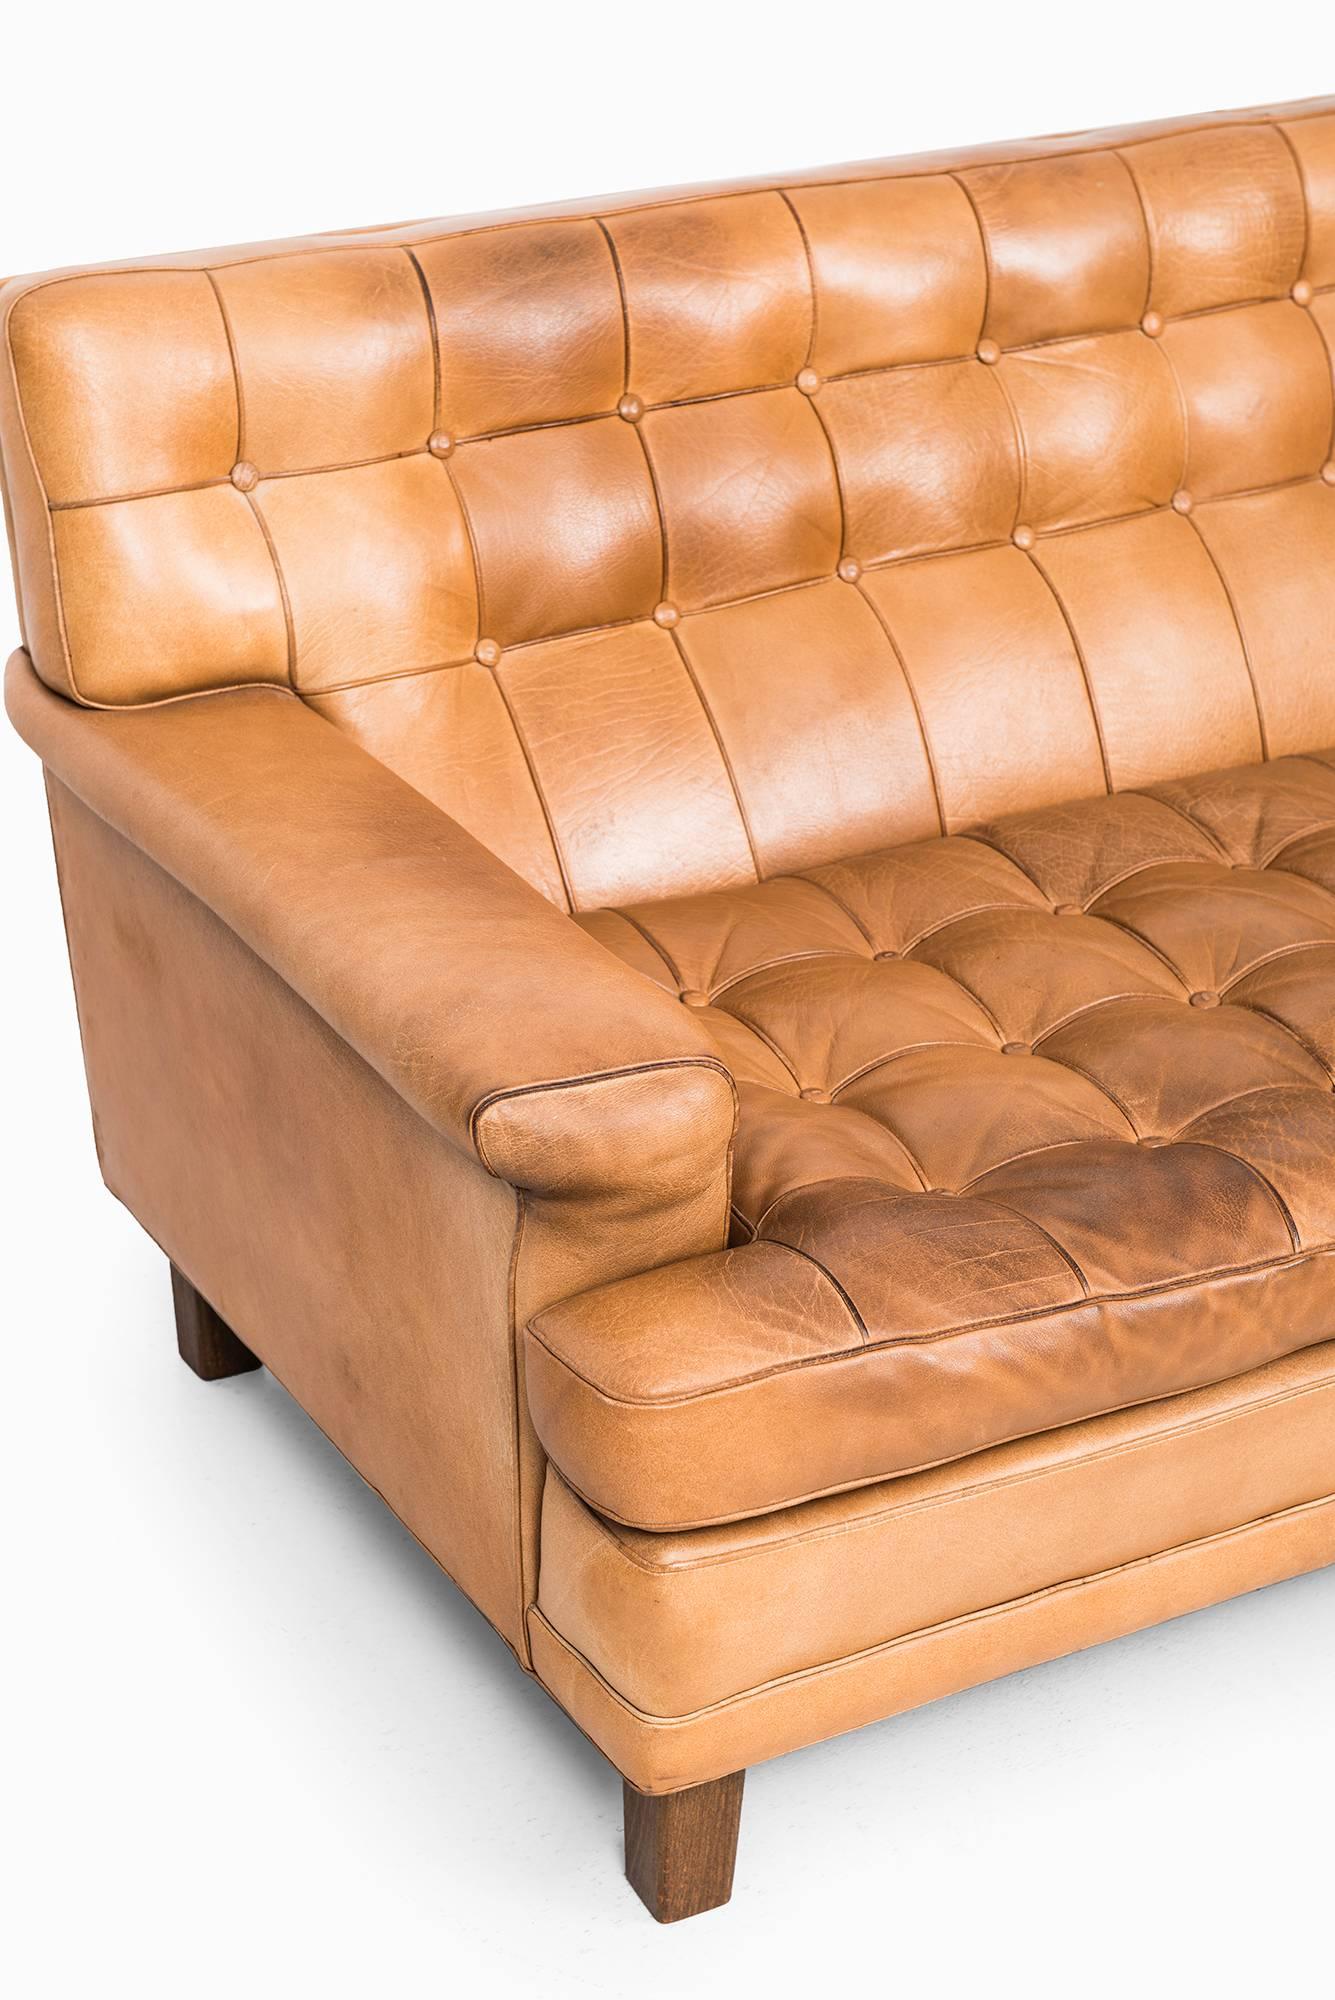 Mid-Century Modern Arne Norell Merkur sofa in cognac brown leather by Norell AB in Sweden